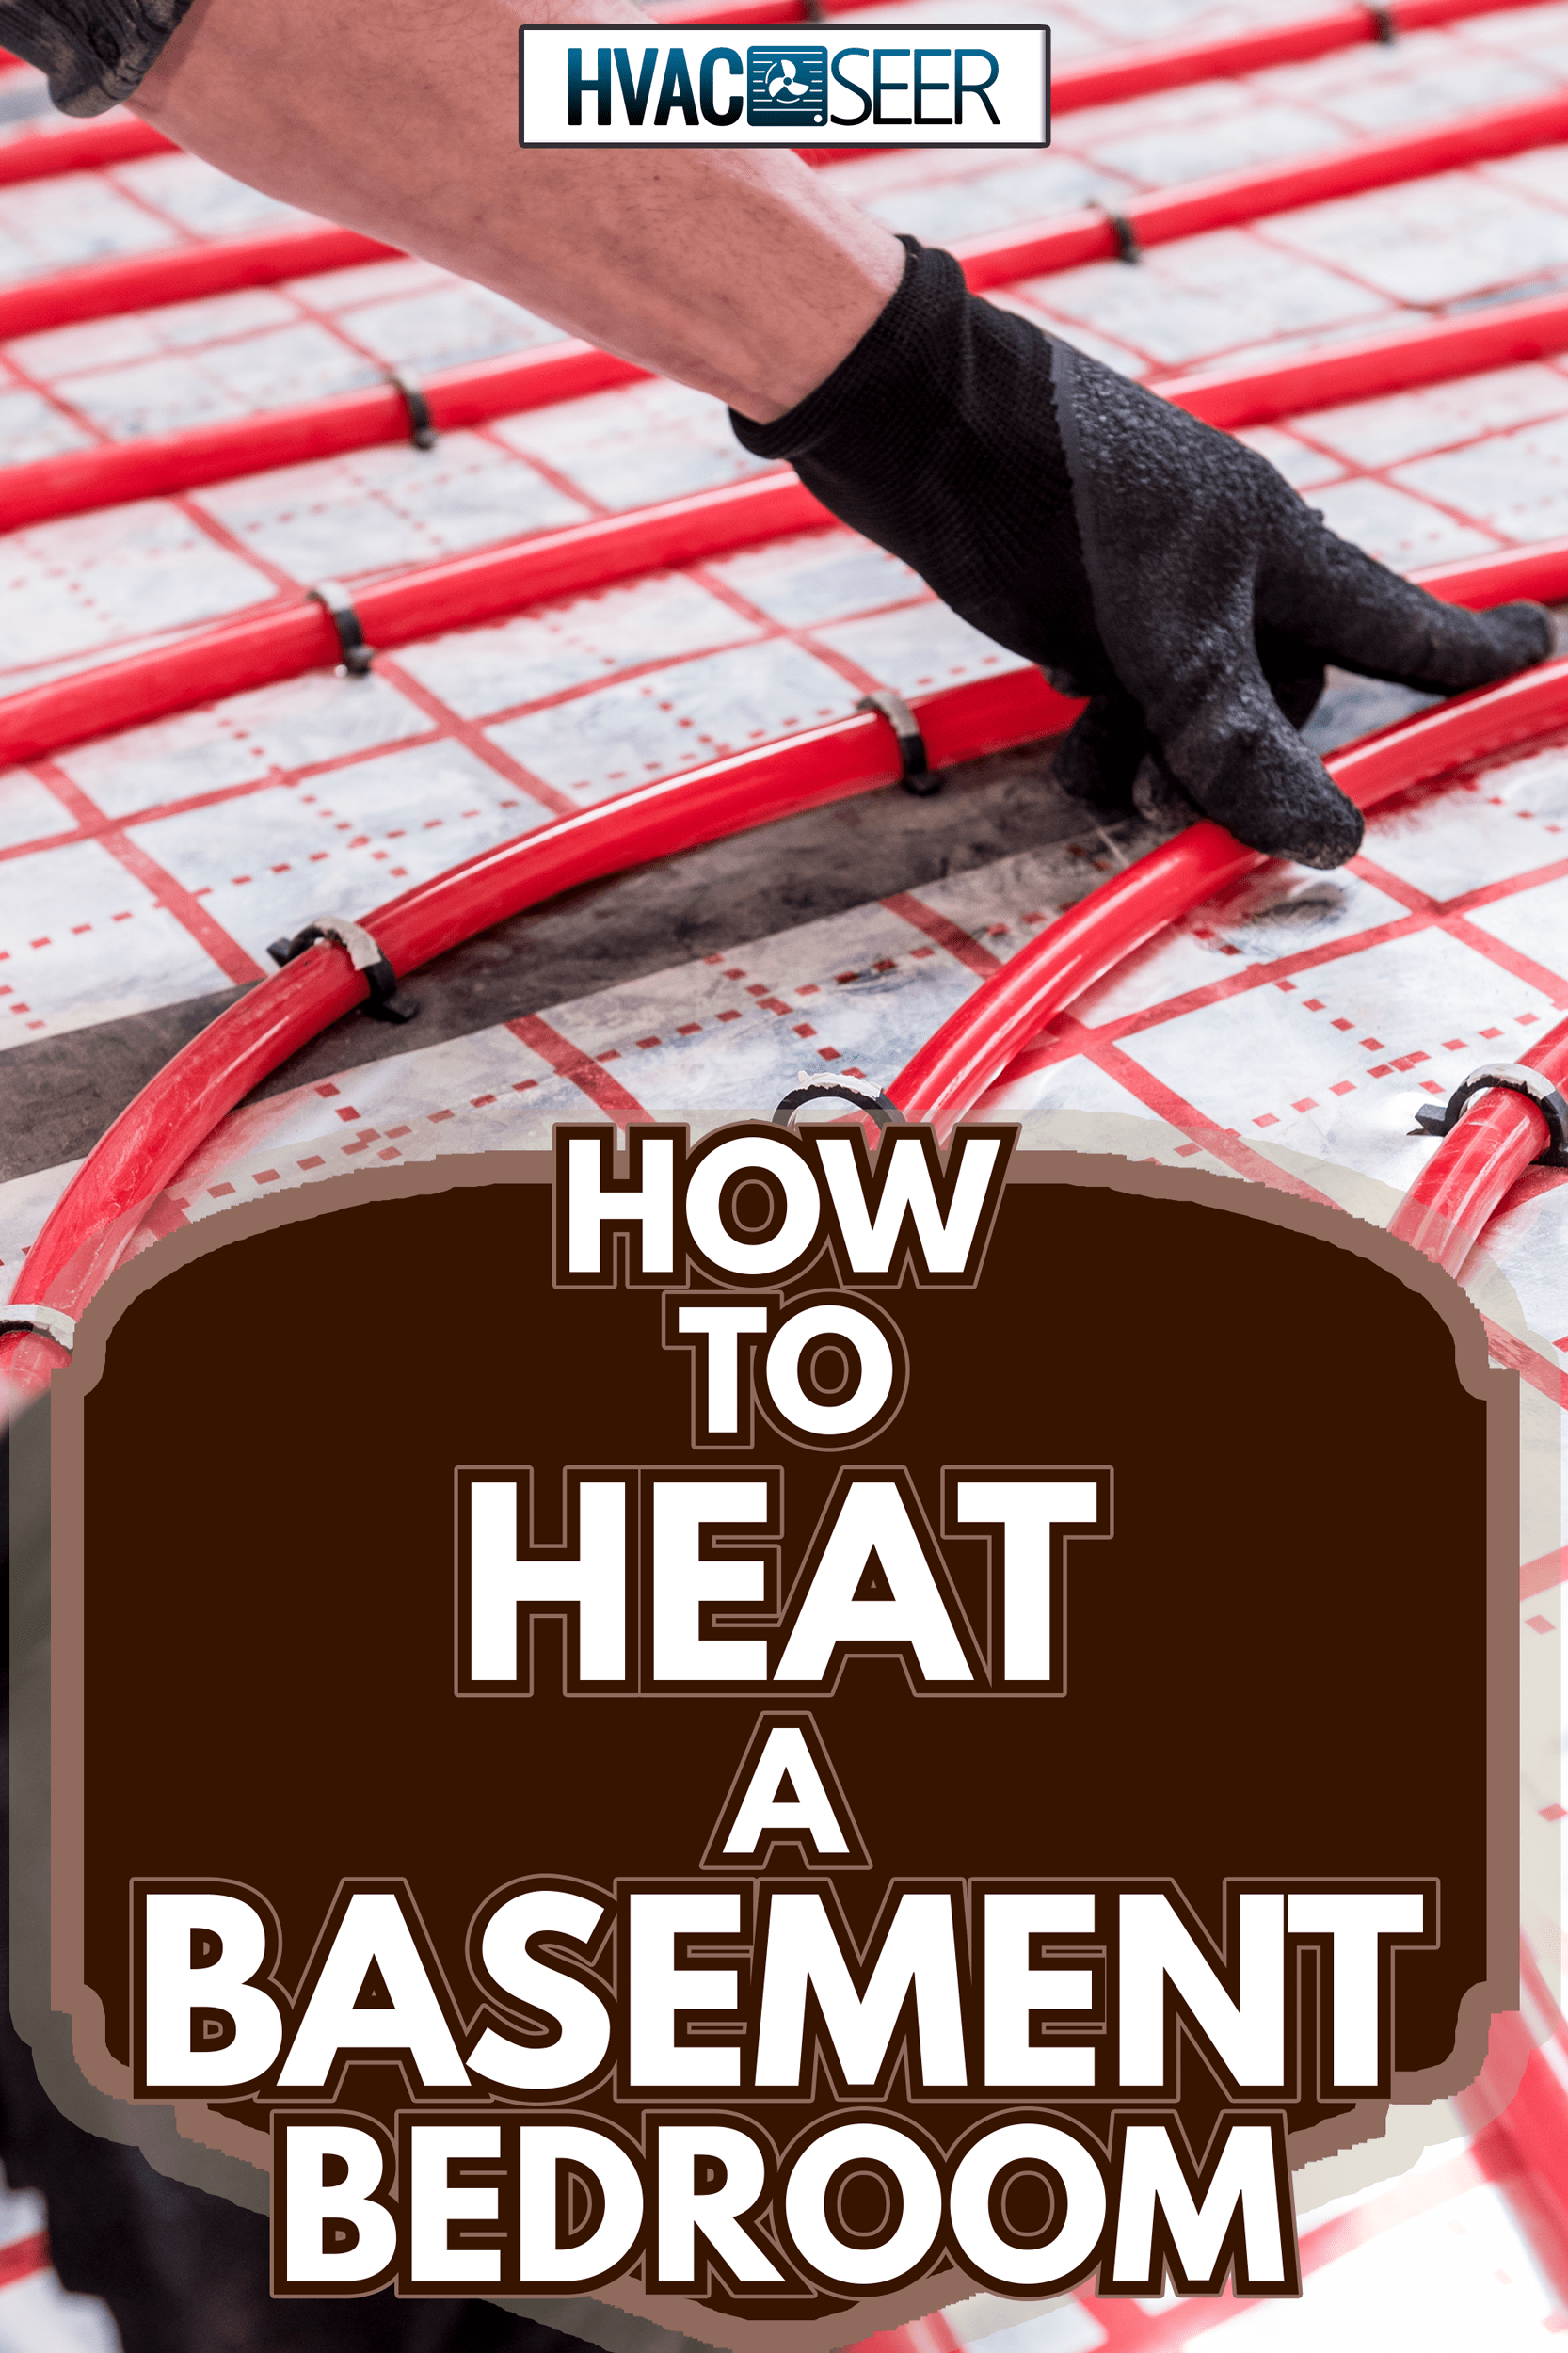 Pipefitter install system of underfloor heating system at home - How To Heat A Basement Bedroom